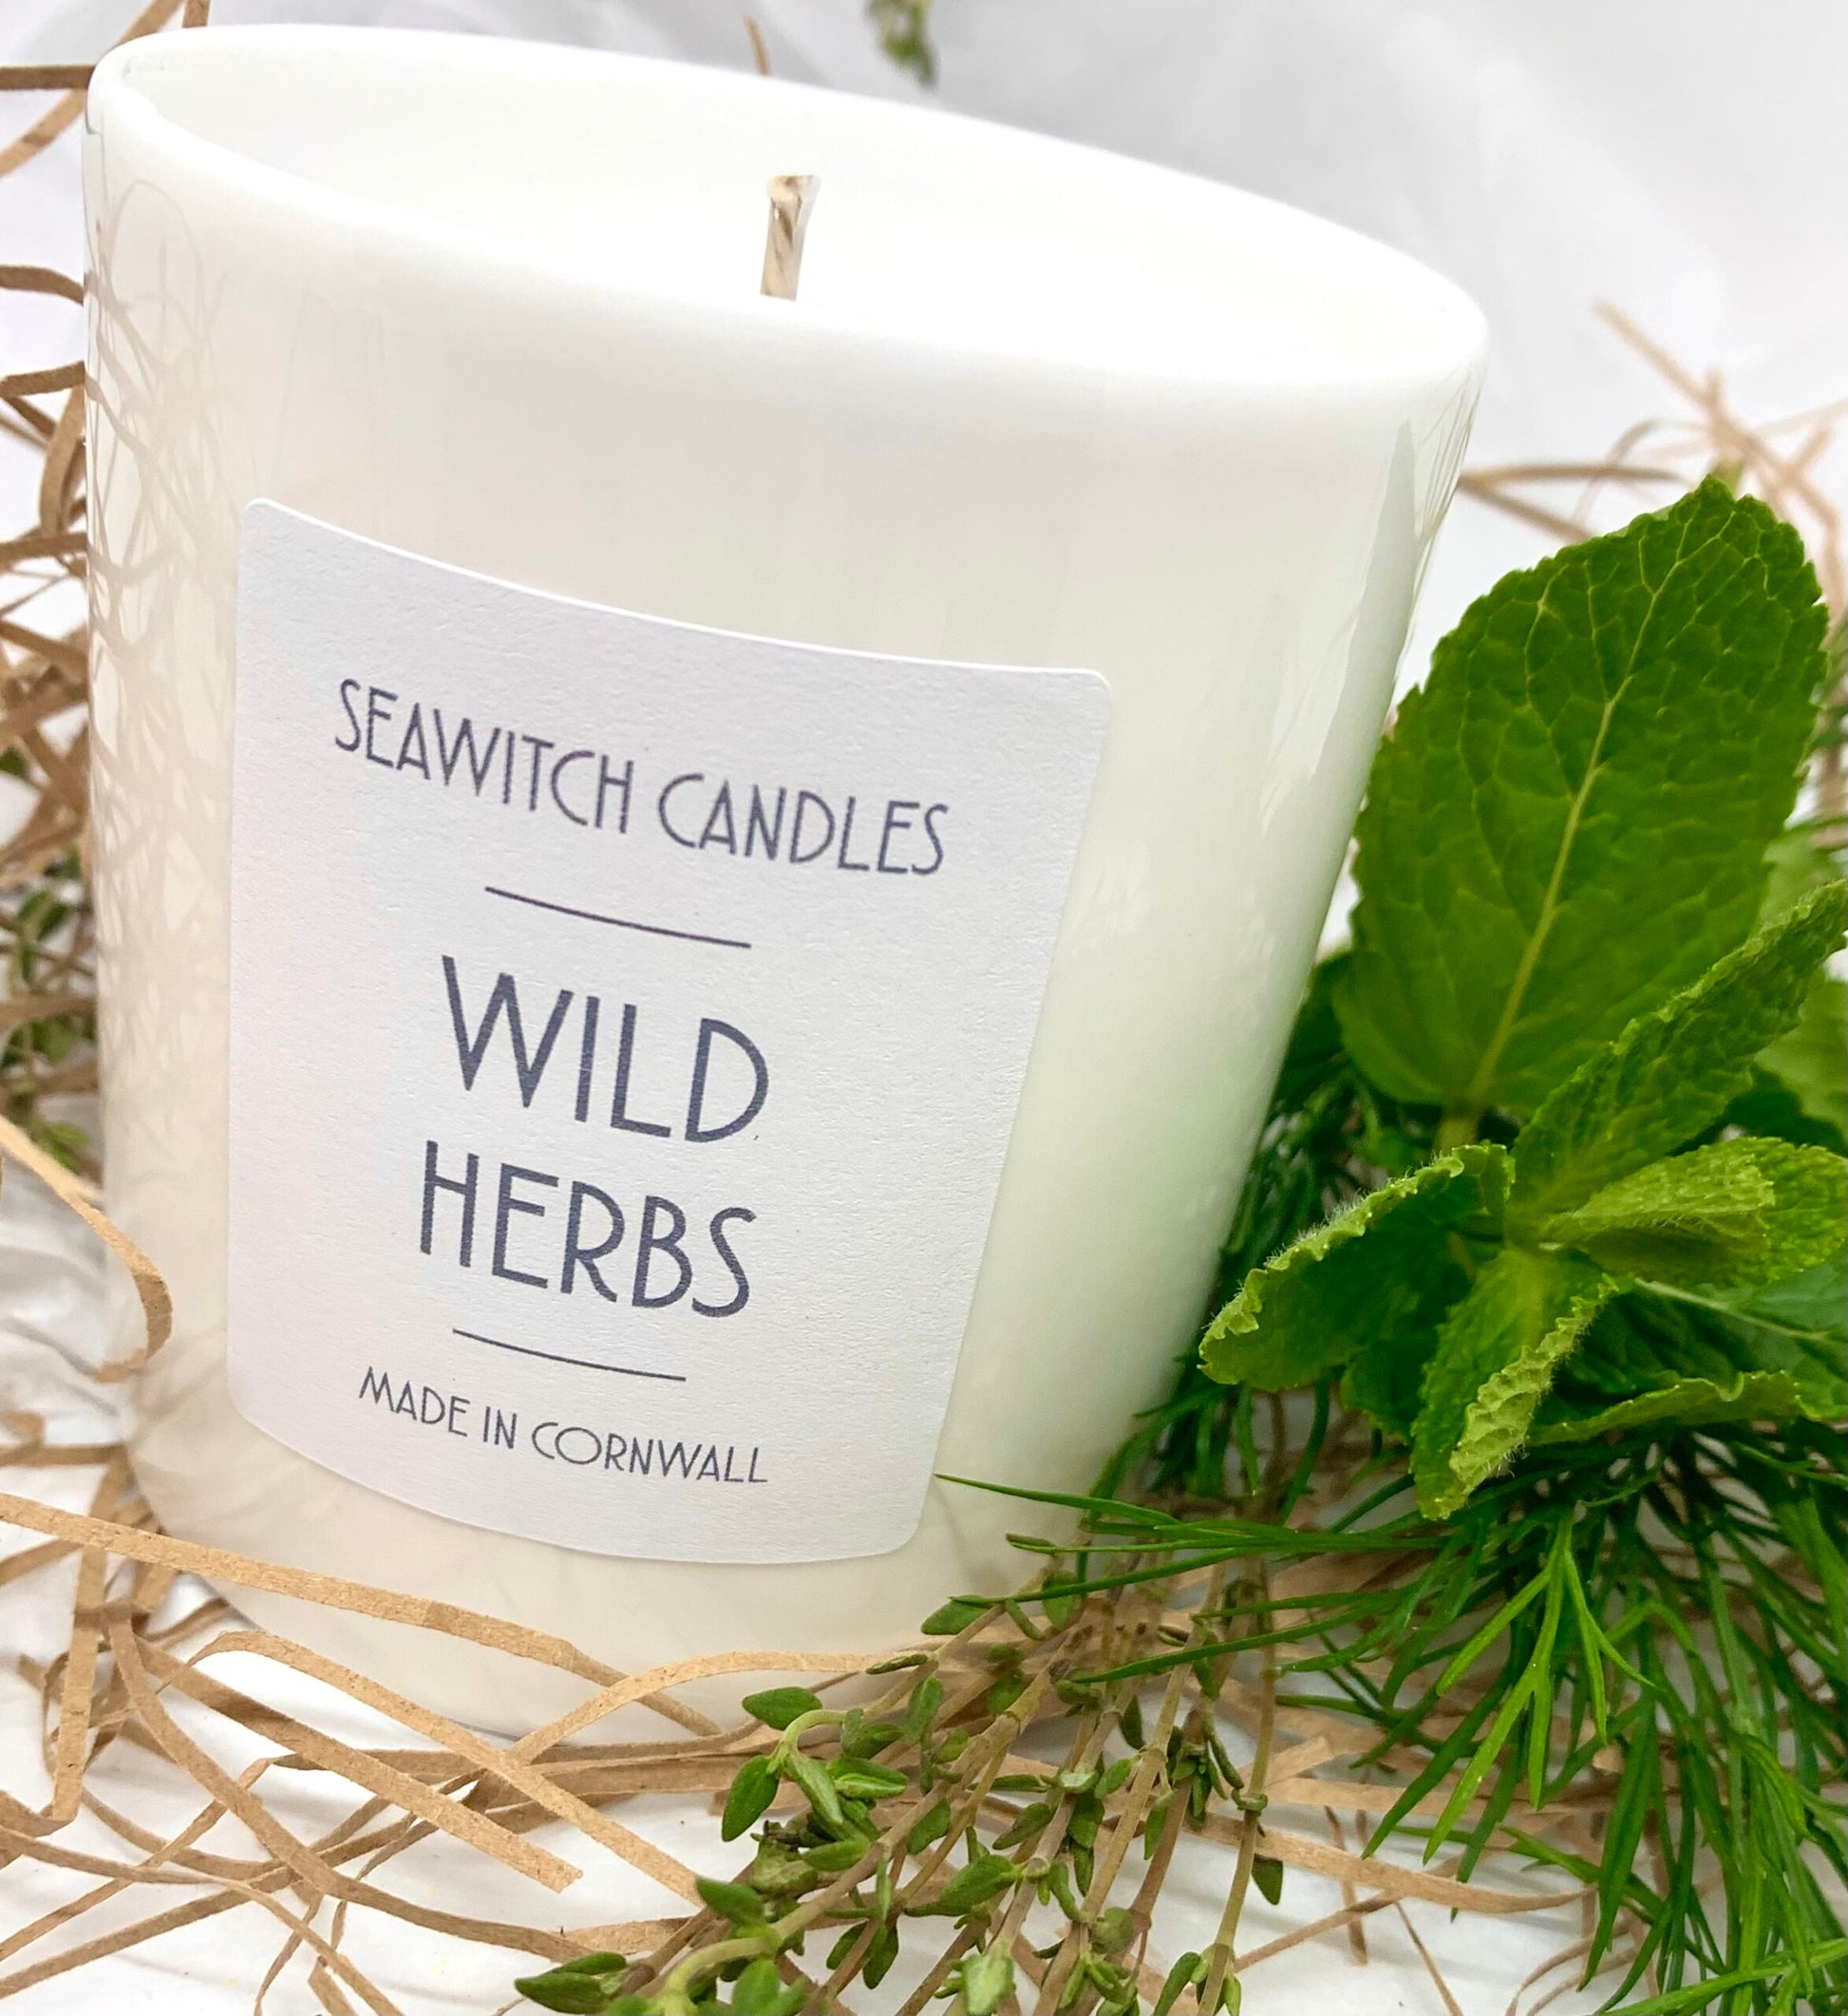 A vibrant, refreshing blend of wild Mediterranean herbs  Burn time of at least 50 hours  &nbsp;Ingredients: natural vegan plant wax, fragrance oils, cotton wick  This candle is hand poured into a white china pot and is made in Mousehole, Cornwall by Seawitch Candles